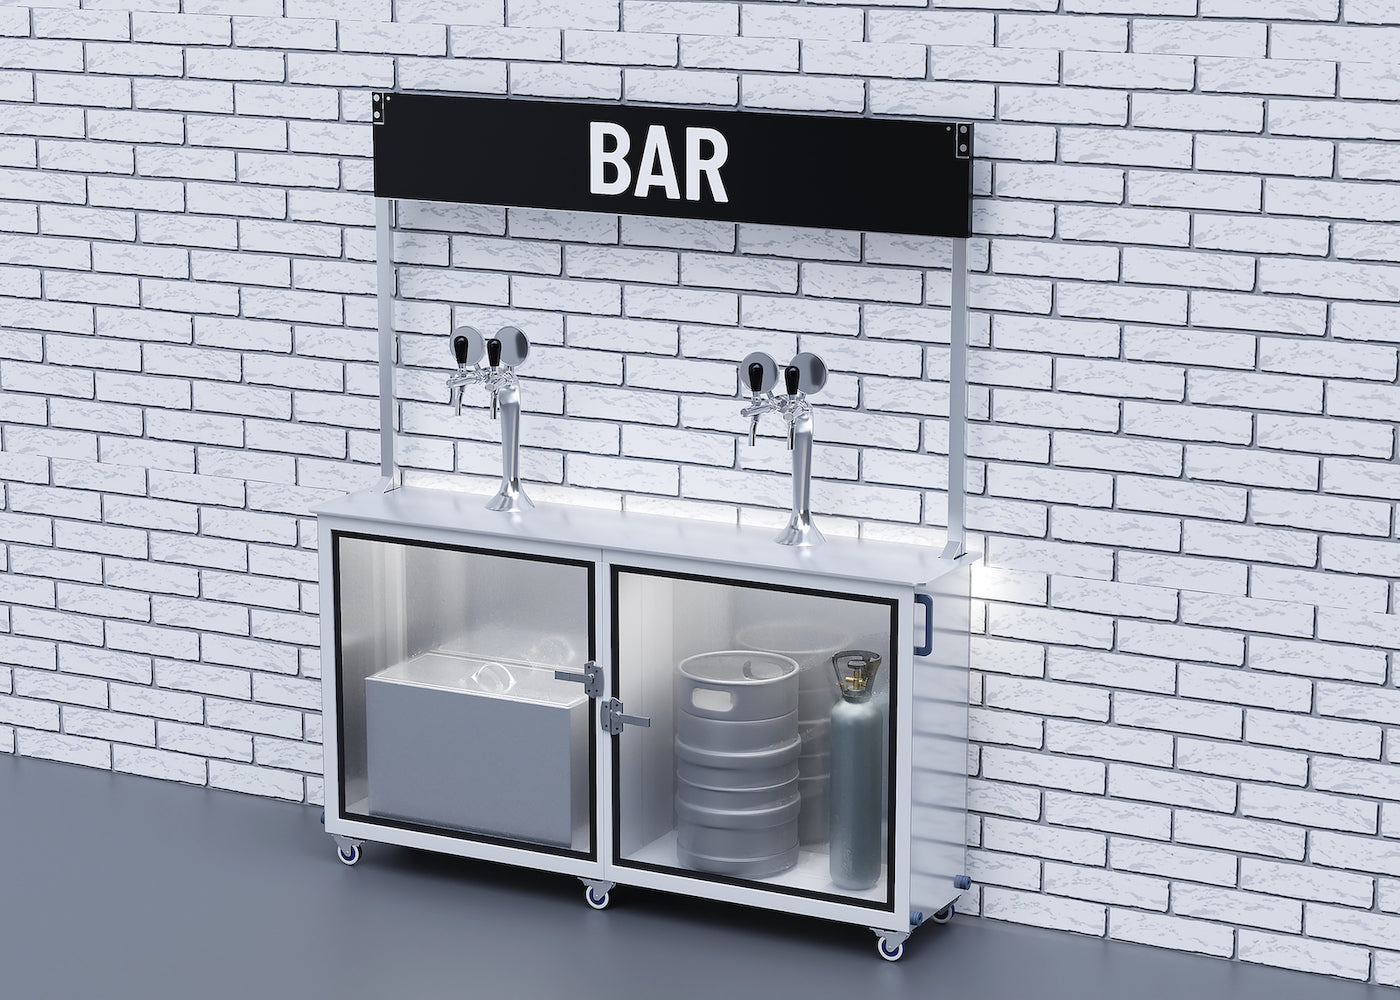 Slimline beer station unpowered (ice-cooled) against a wall at an angle